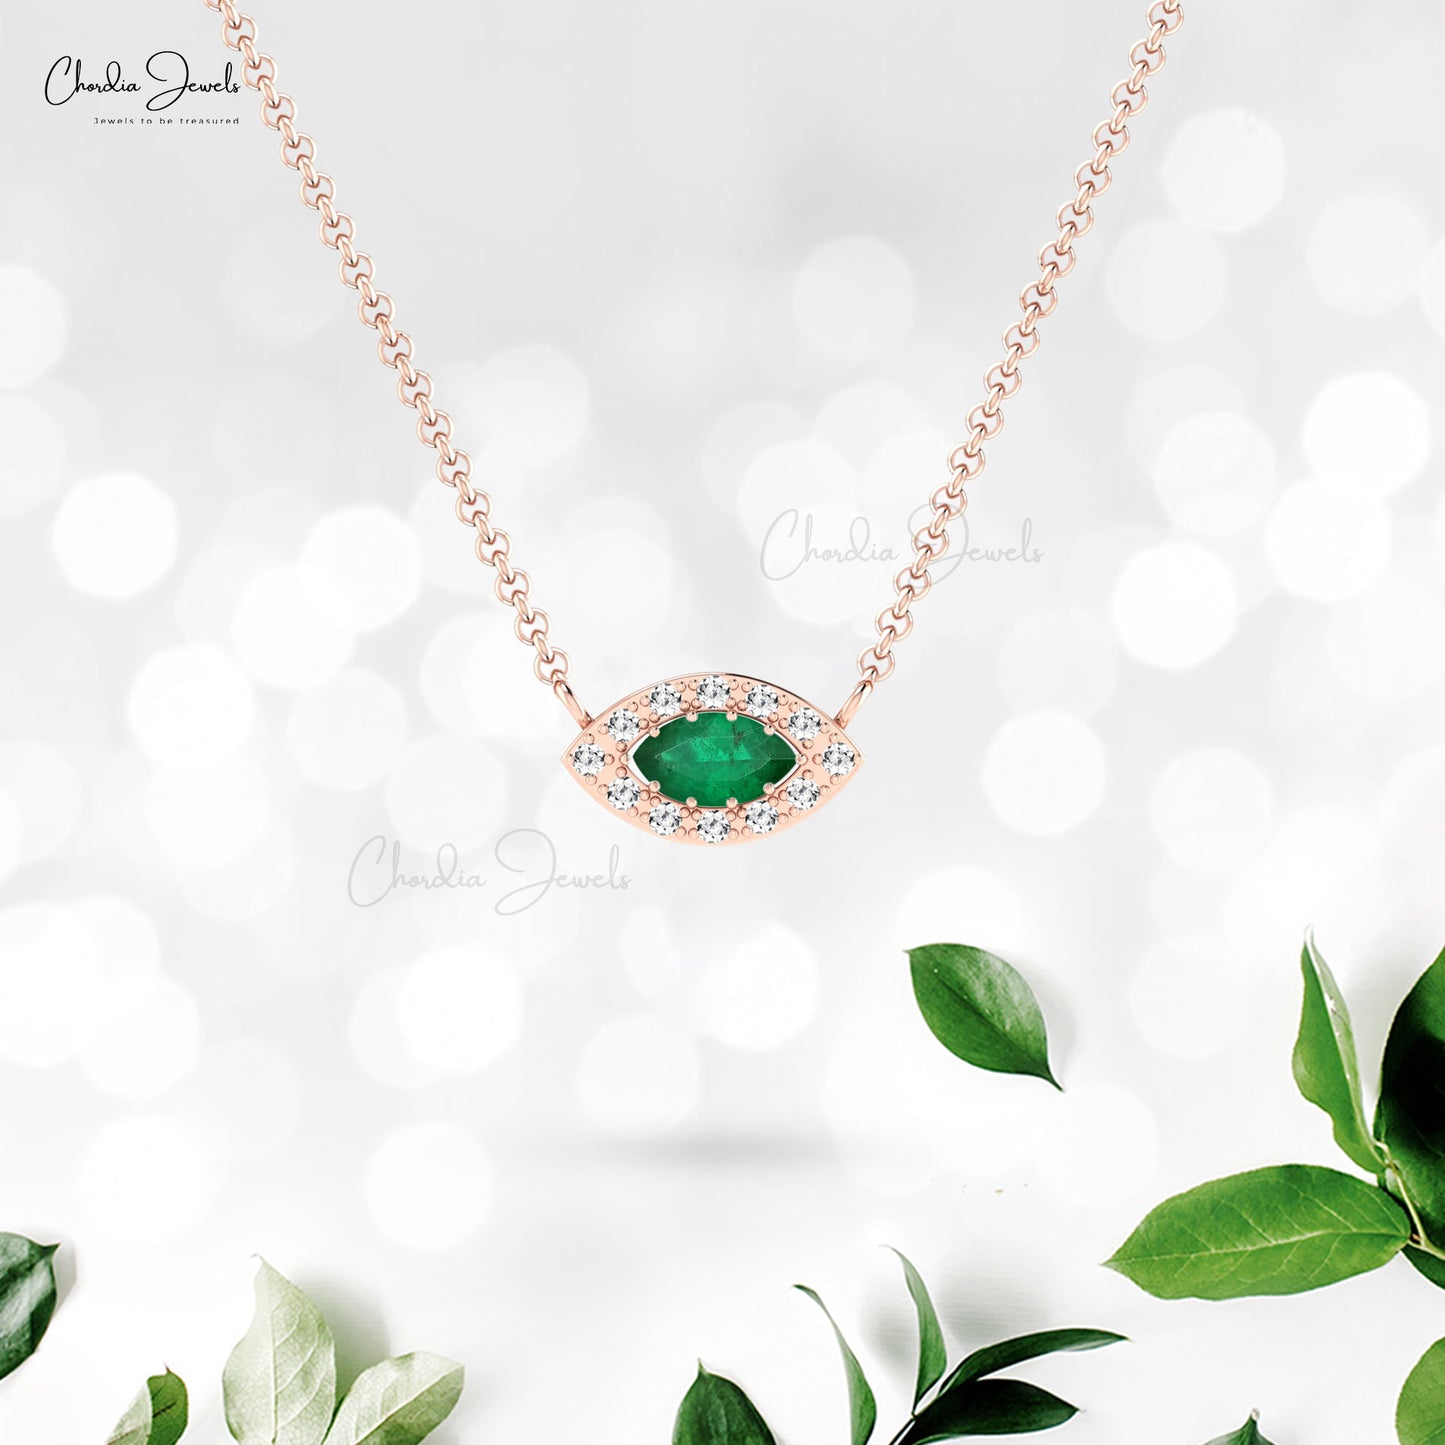 Customized Natural White Diamond Halo Necklace Pendant in Real 14k Gold Marquise Shape Green Emerald Gemstone Pendant Jewelry For Wife